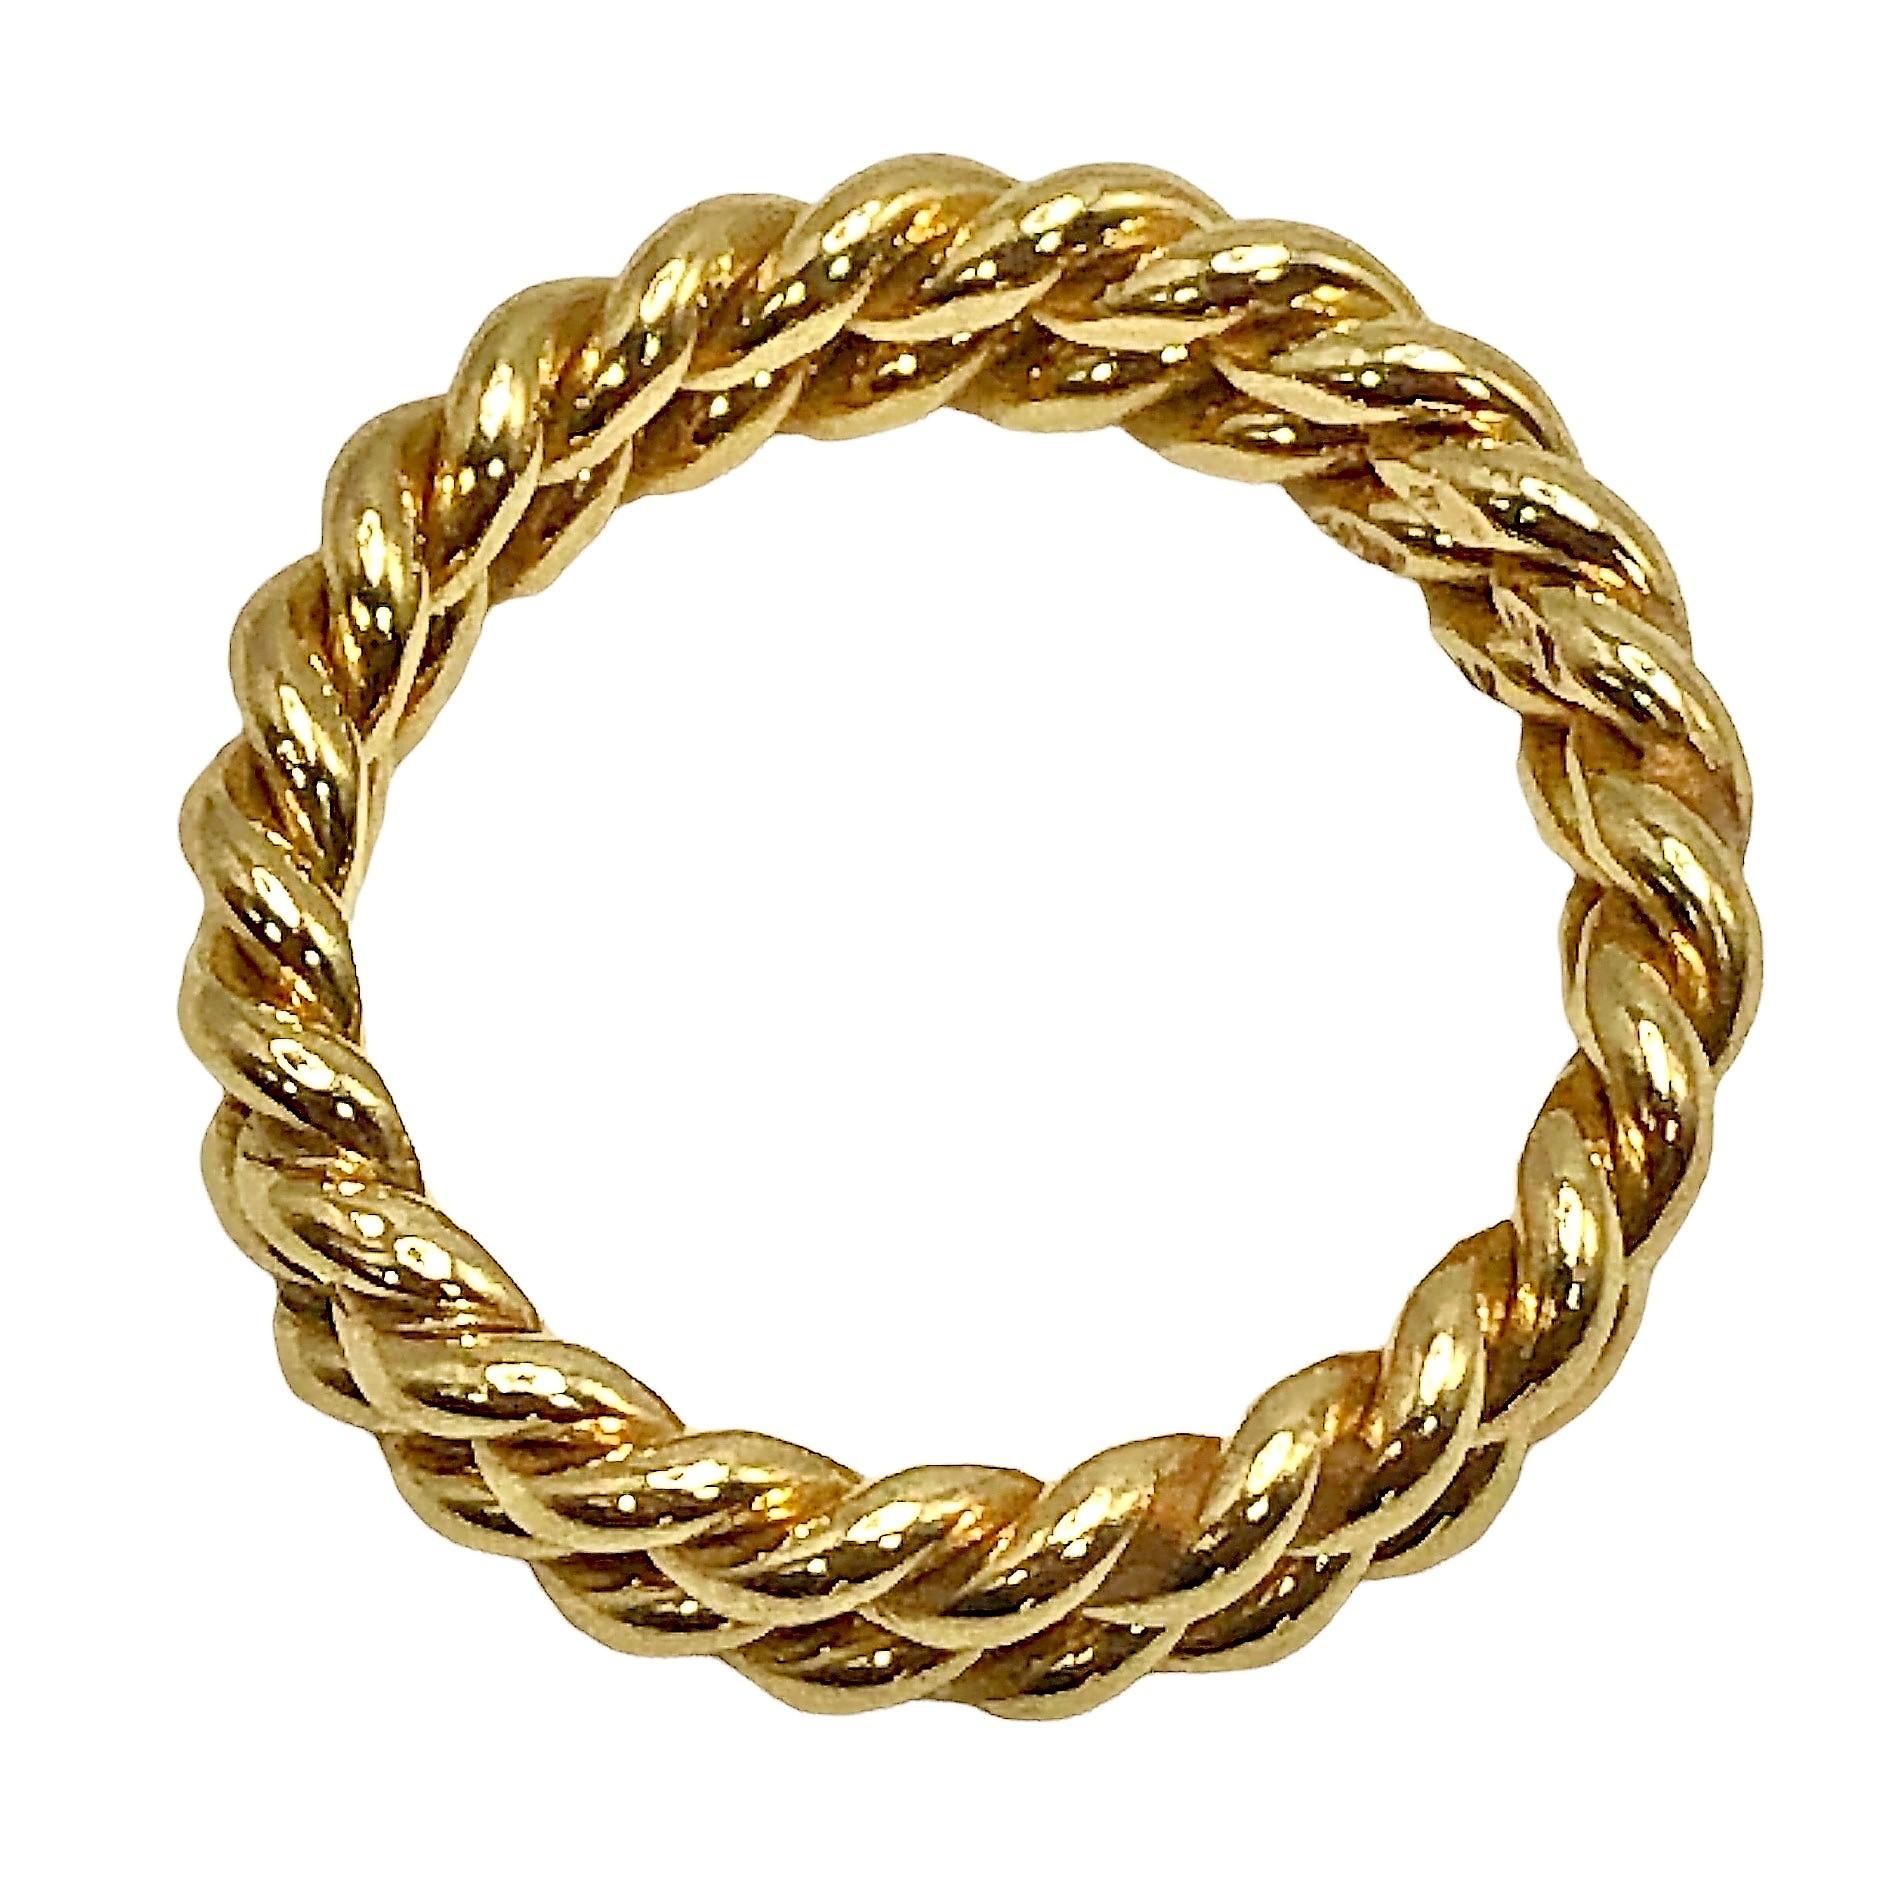 This delicate pair of handmade 14k yellow gold guard rings have a thickness of slightly larger than 2.3mm each, for a combined width of 4.7mm. They are beautifully and lovingly crafted, and are certain to make any cherished band stand out when